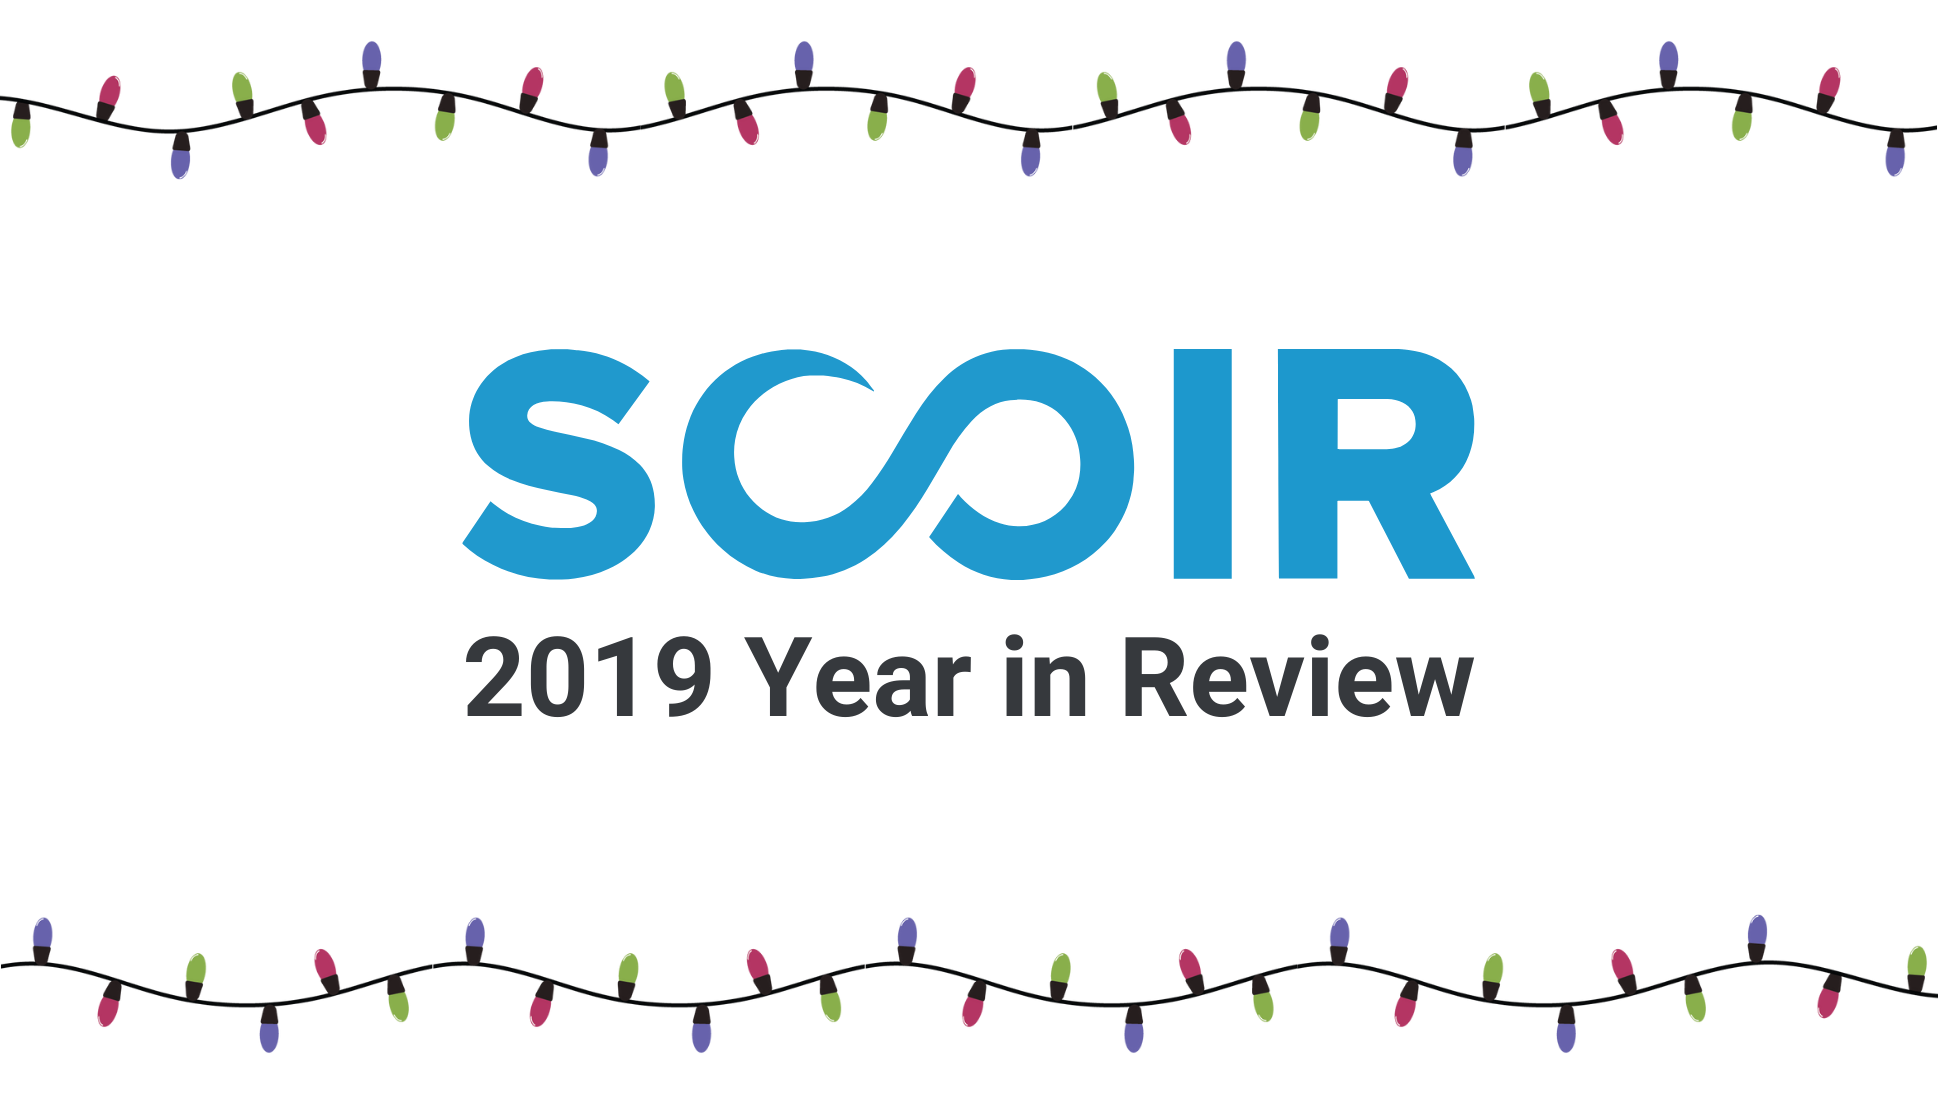 Scoir's 2019 Year in Review